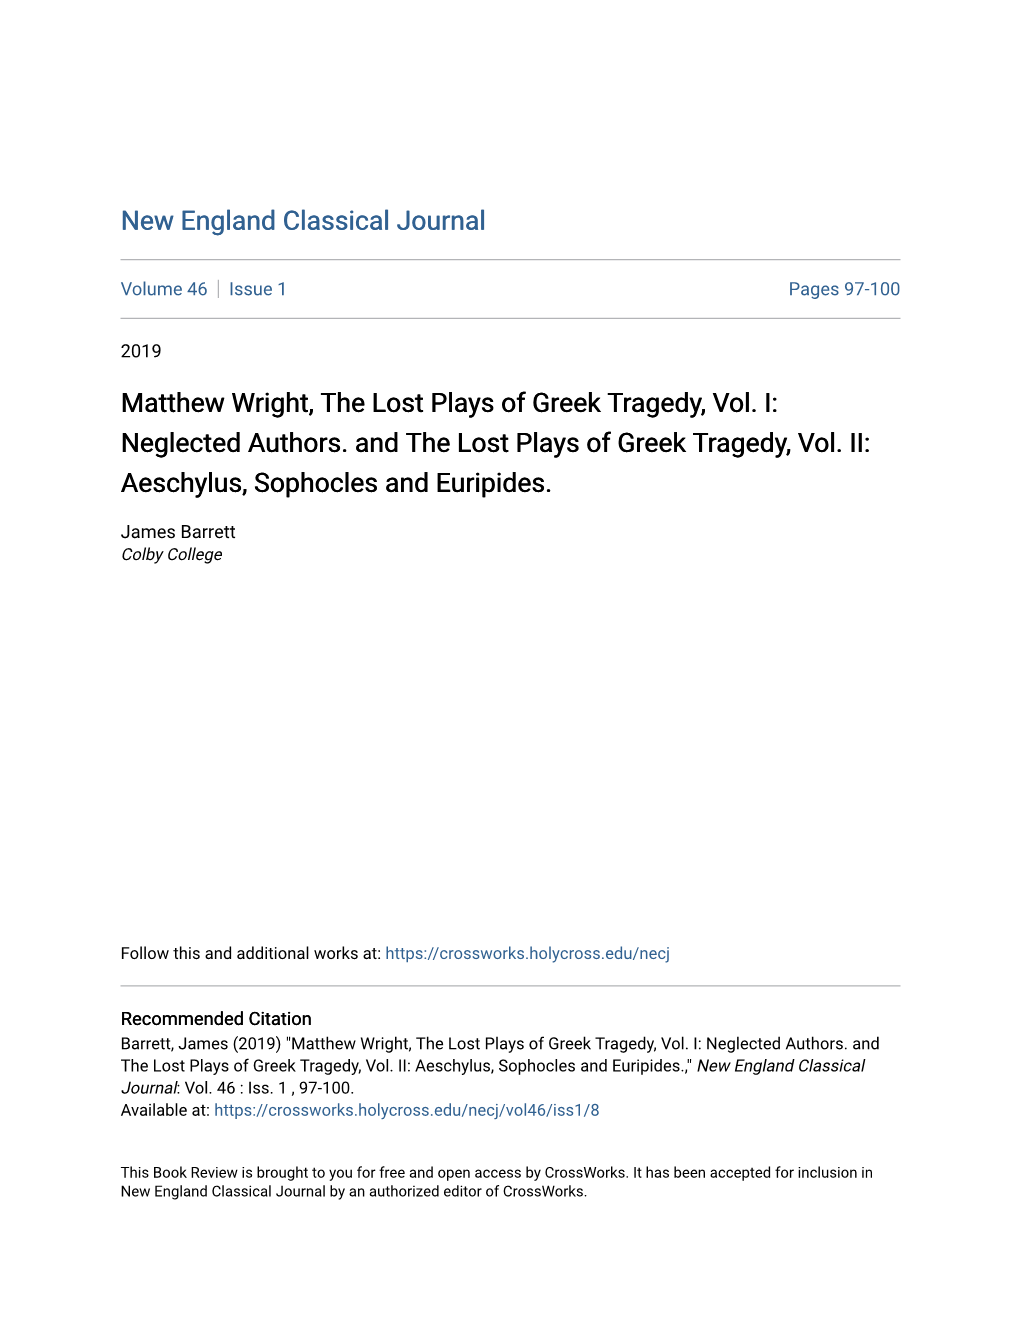 Matthew Wright, the Lost Plays of Greek Tragedy, Vol. I: Neglected Authors